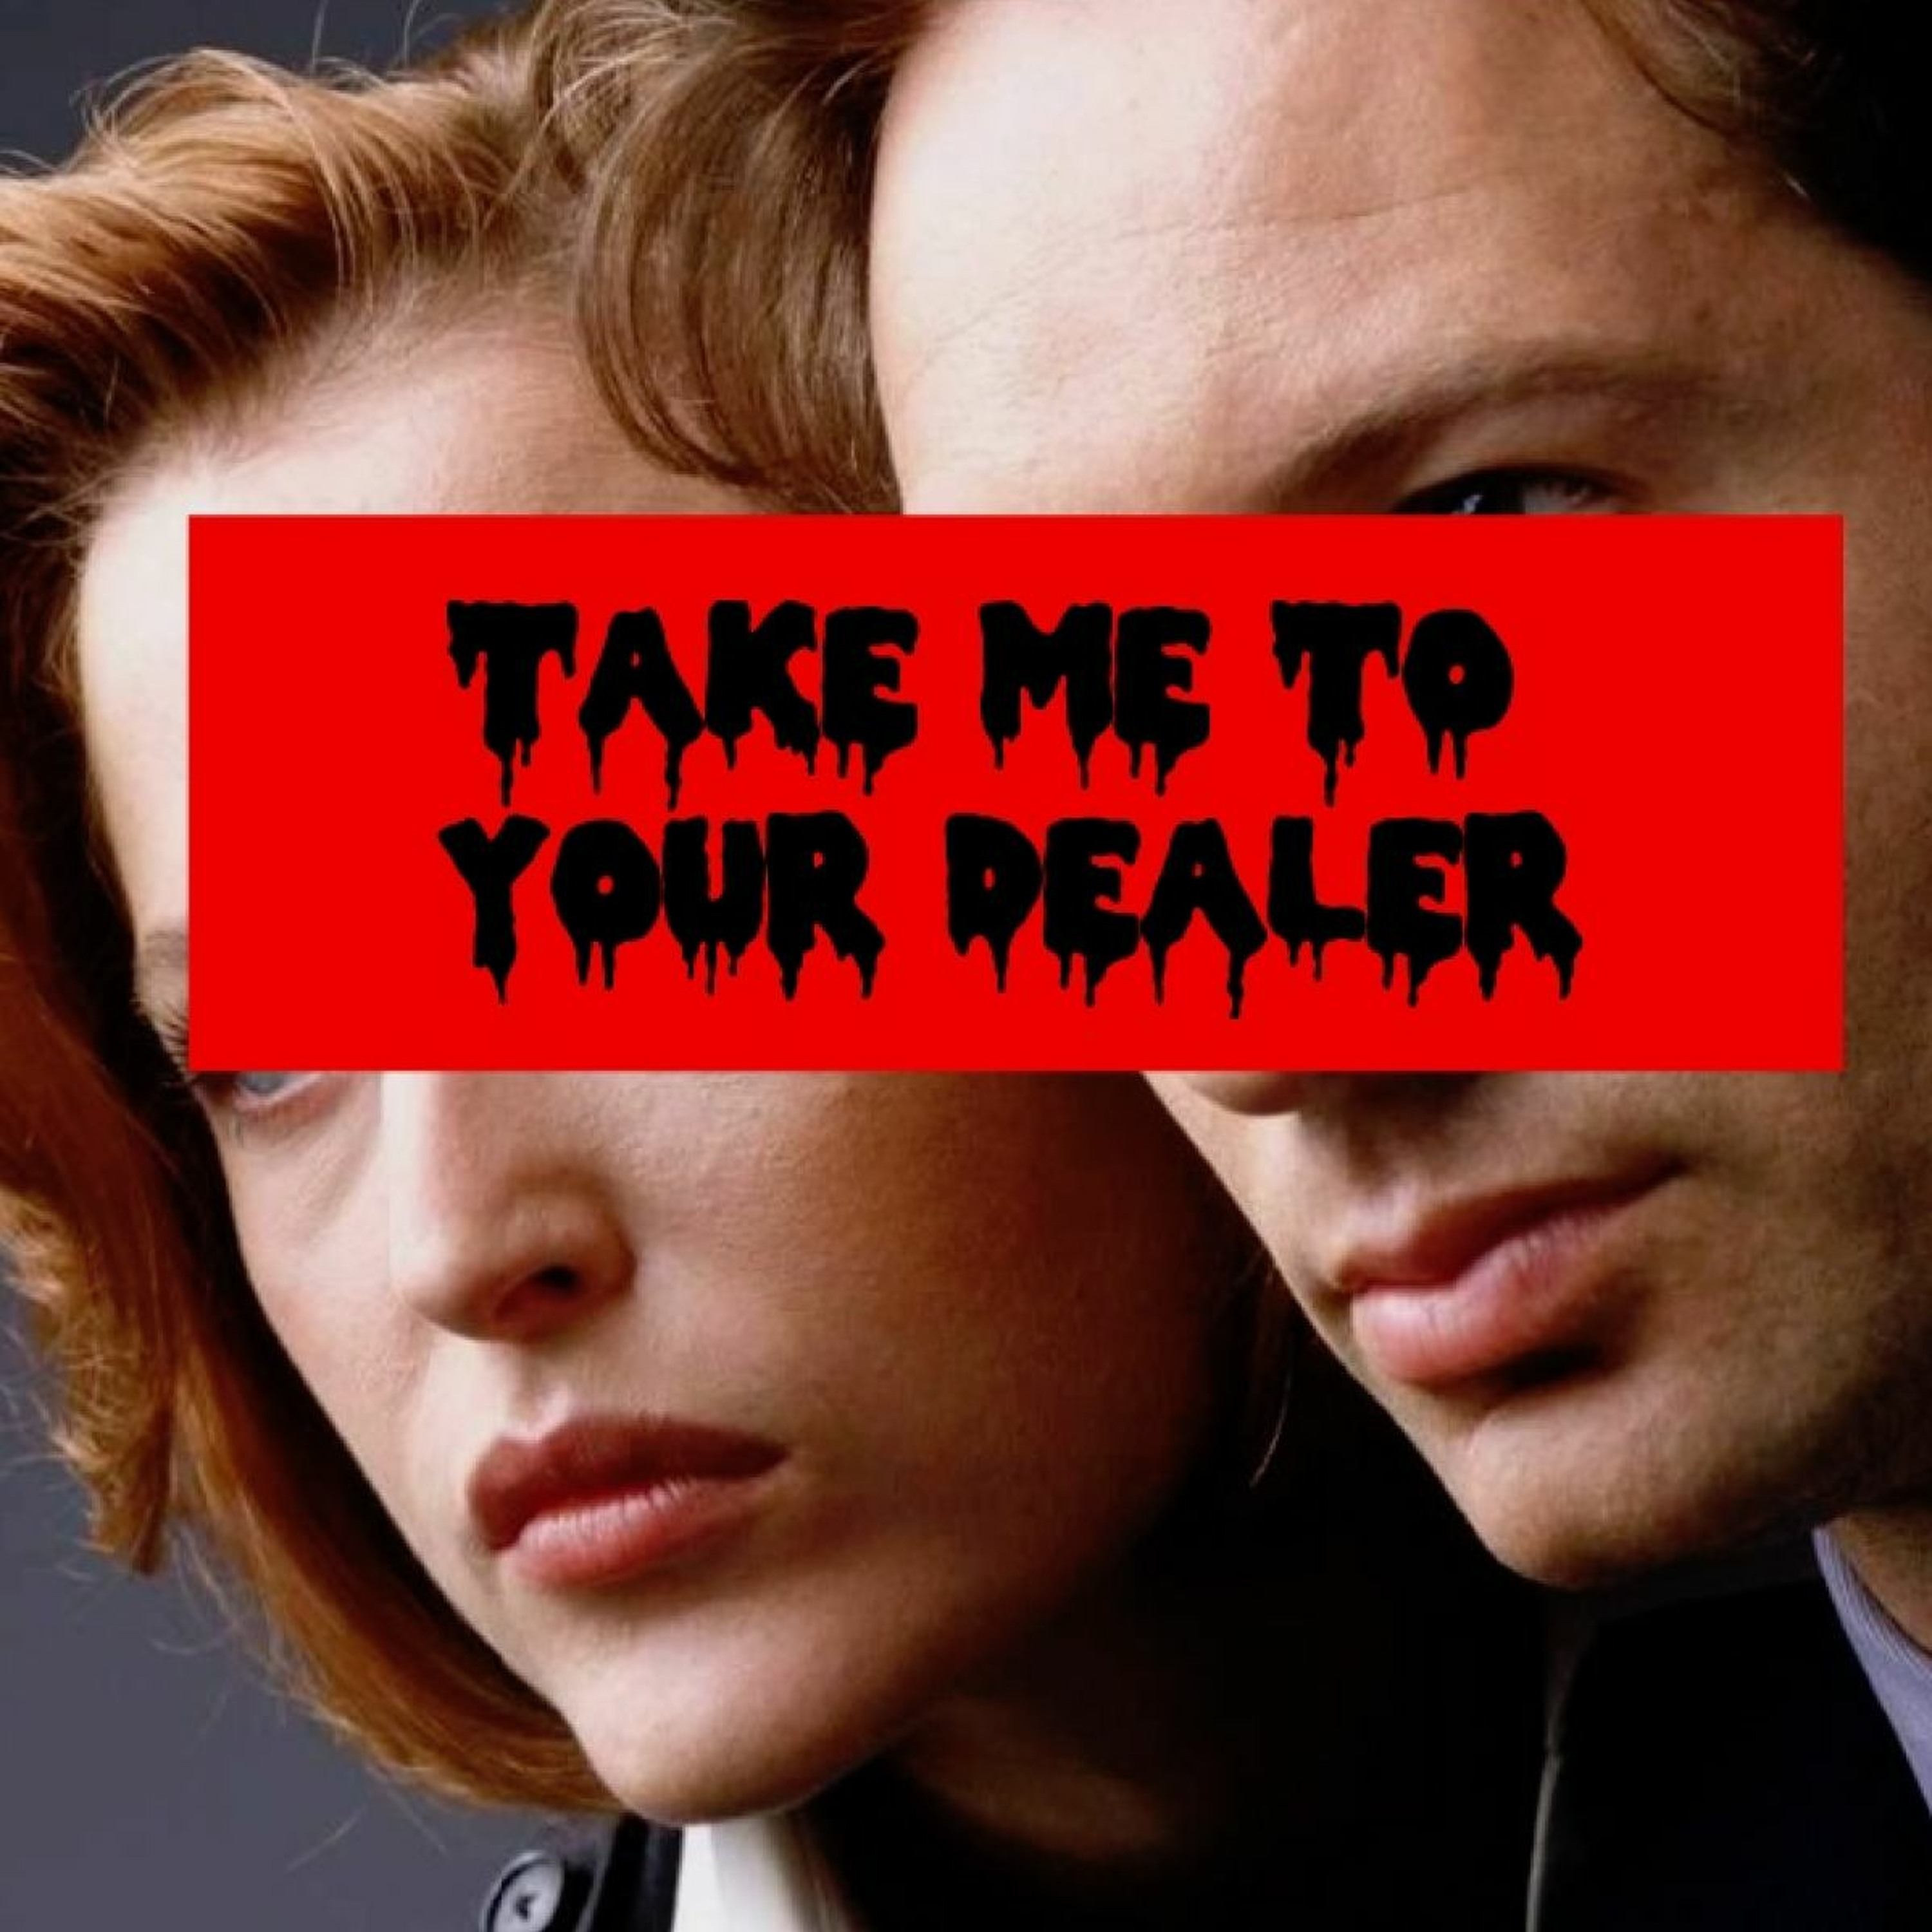 Episode 9: Take Me To Your Dealer